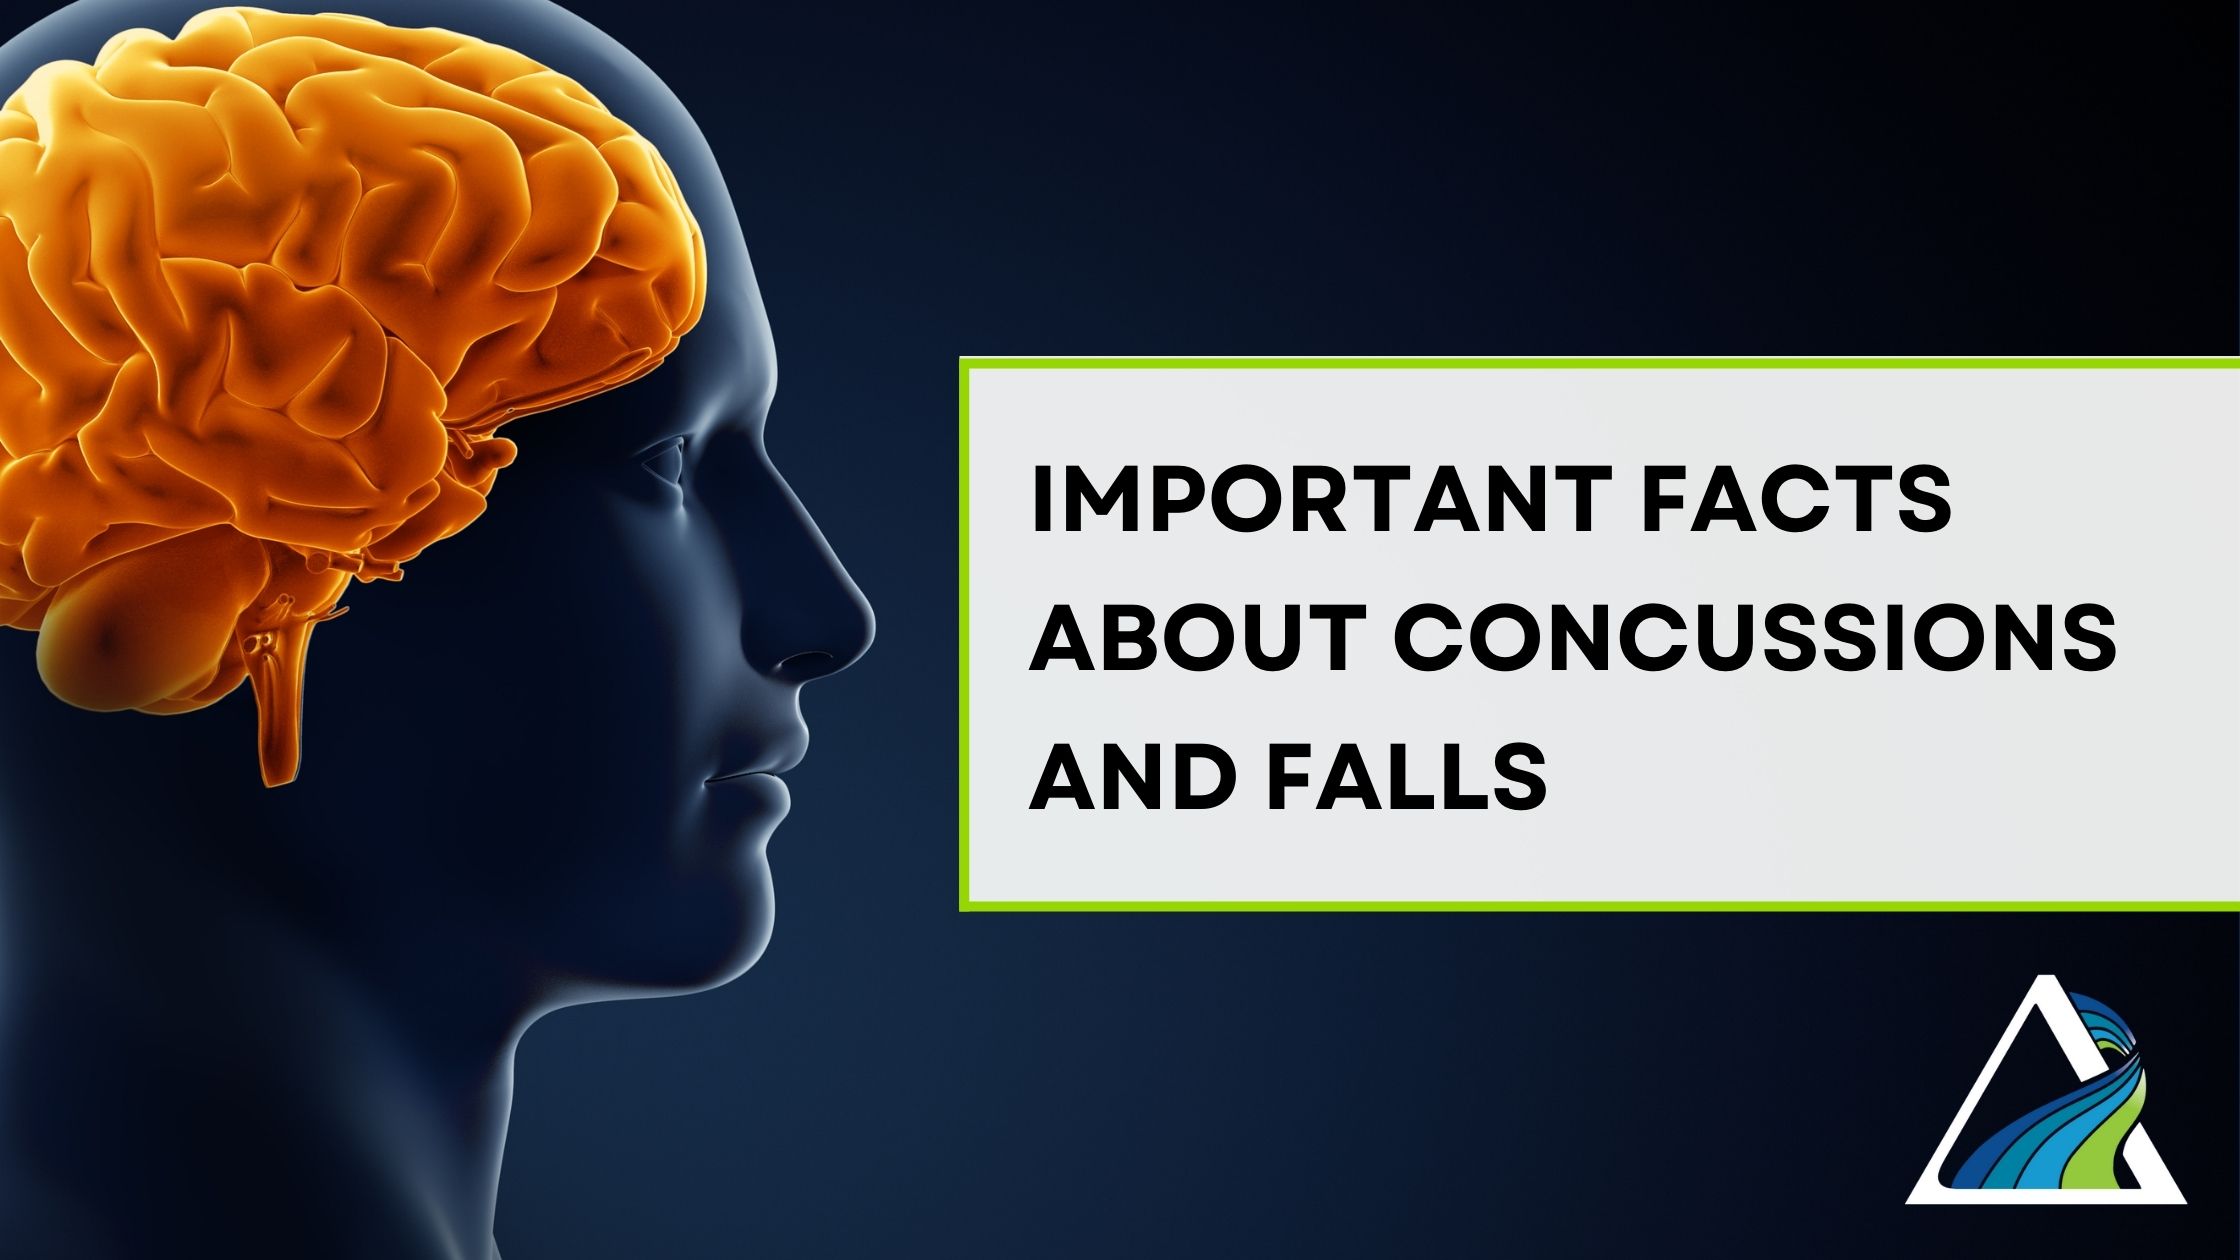 Important facts about concussions and falls